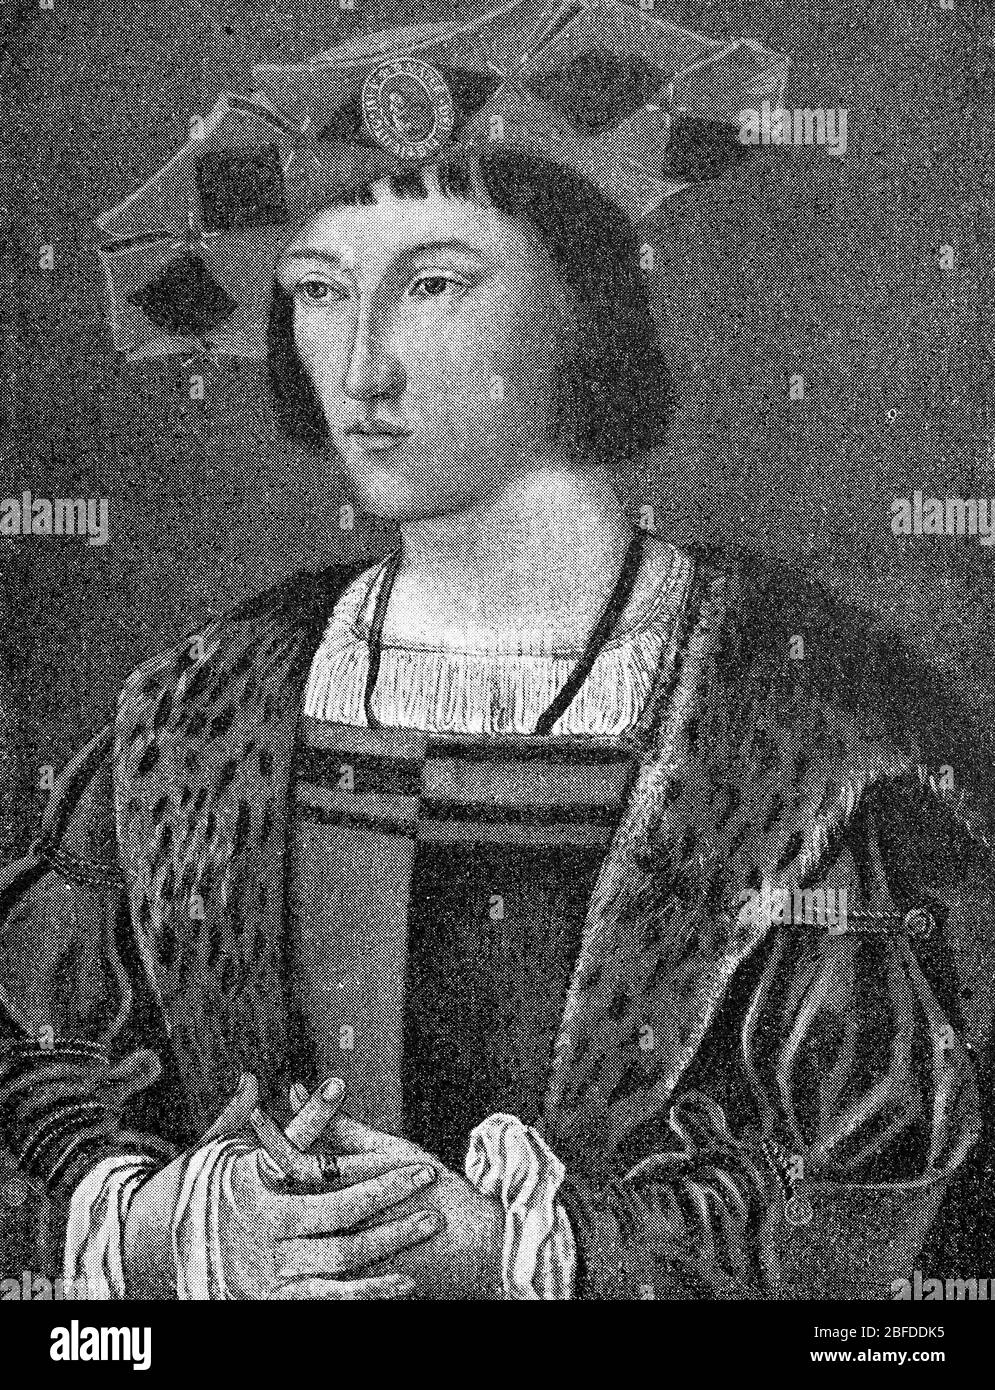 Charles VIII the Friendly or the Courtly, Charles VIII l'Affable or le Courtois, 30 June 1470 - 7 April 1498, was King of France from 1483 to 1498  /  Karl VIII. der Freundliche oder der Höfisch, Charles VIII l'Affable oder le Courtois, 30. Juni 1470 - 7. April 1498, war von 1483 bis 1498 König von Frankreich, Historisch, historical, digital improved reproduction of an original from the 19th century / digitale Reproduktion einer Originalvorlage aus dem 19. Jahrhundert Stock Photo